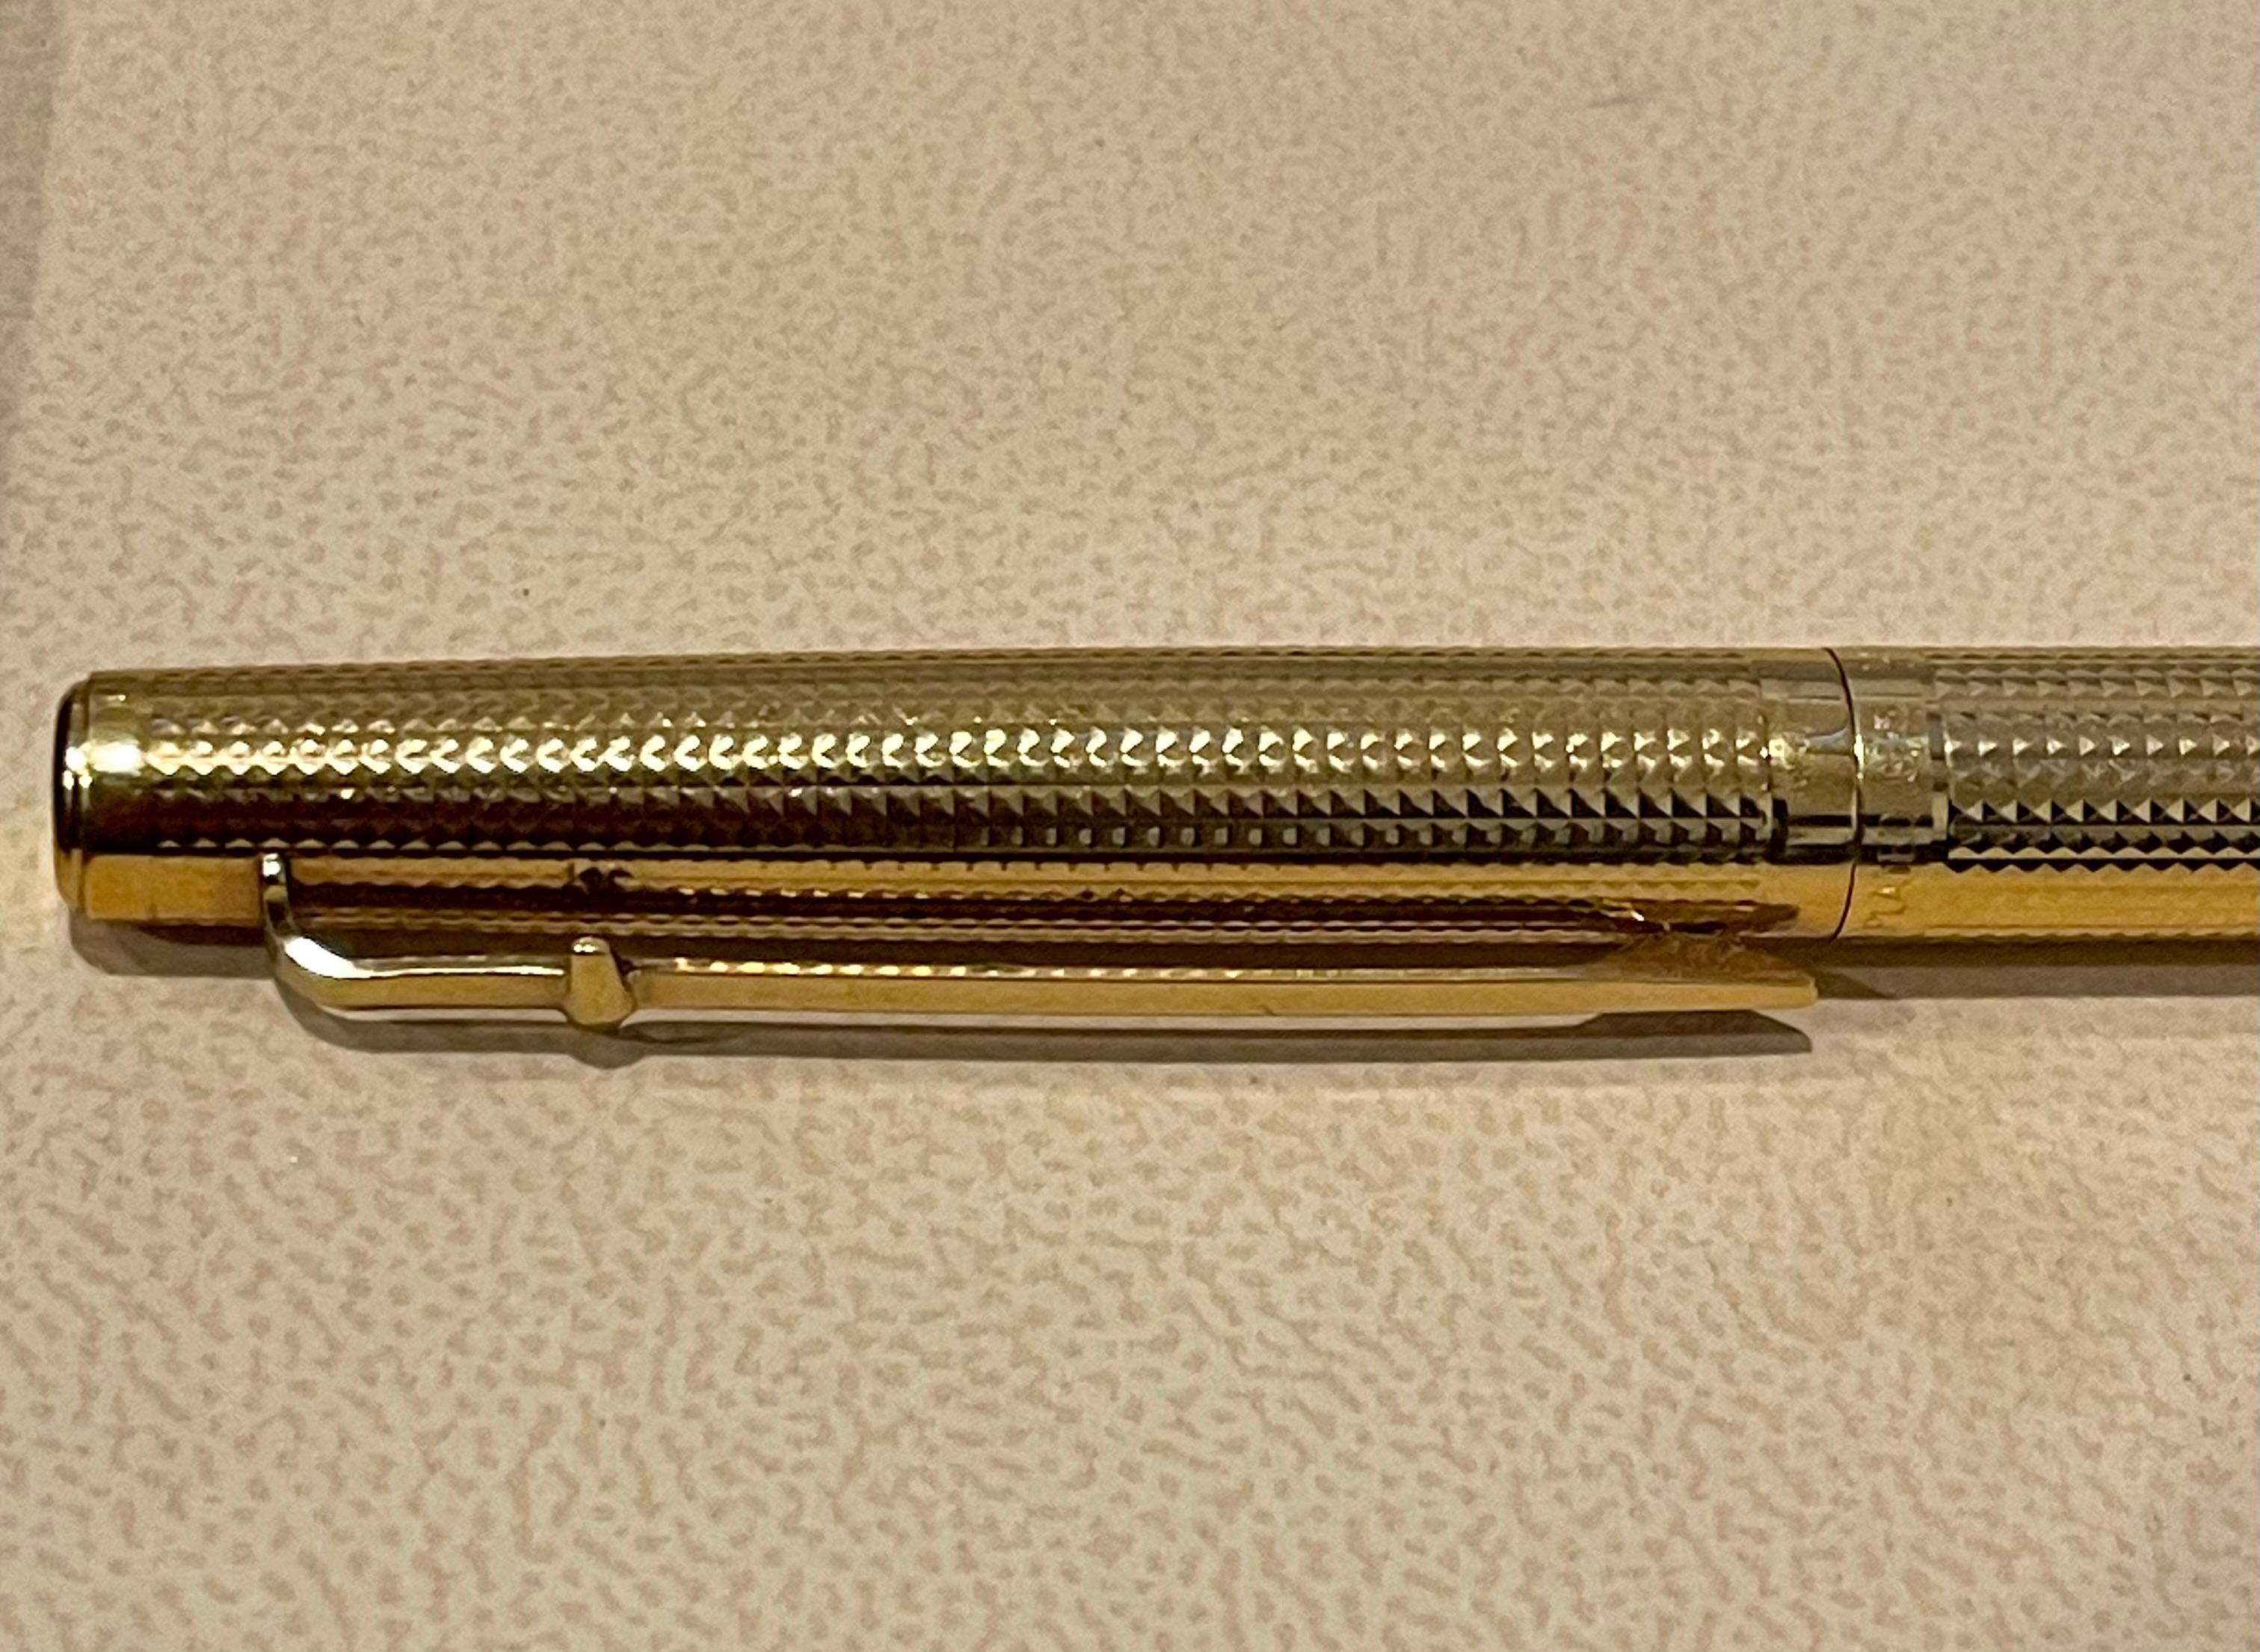 Caran d'Ache Fountain Pen Of Prestige Gold Plated Made in Switzerland 3